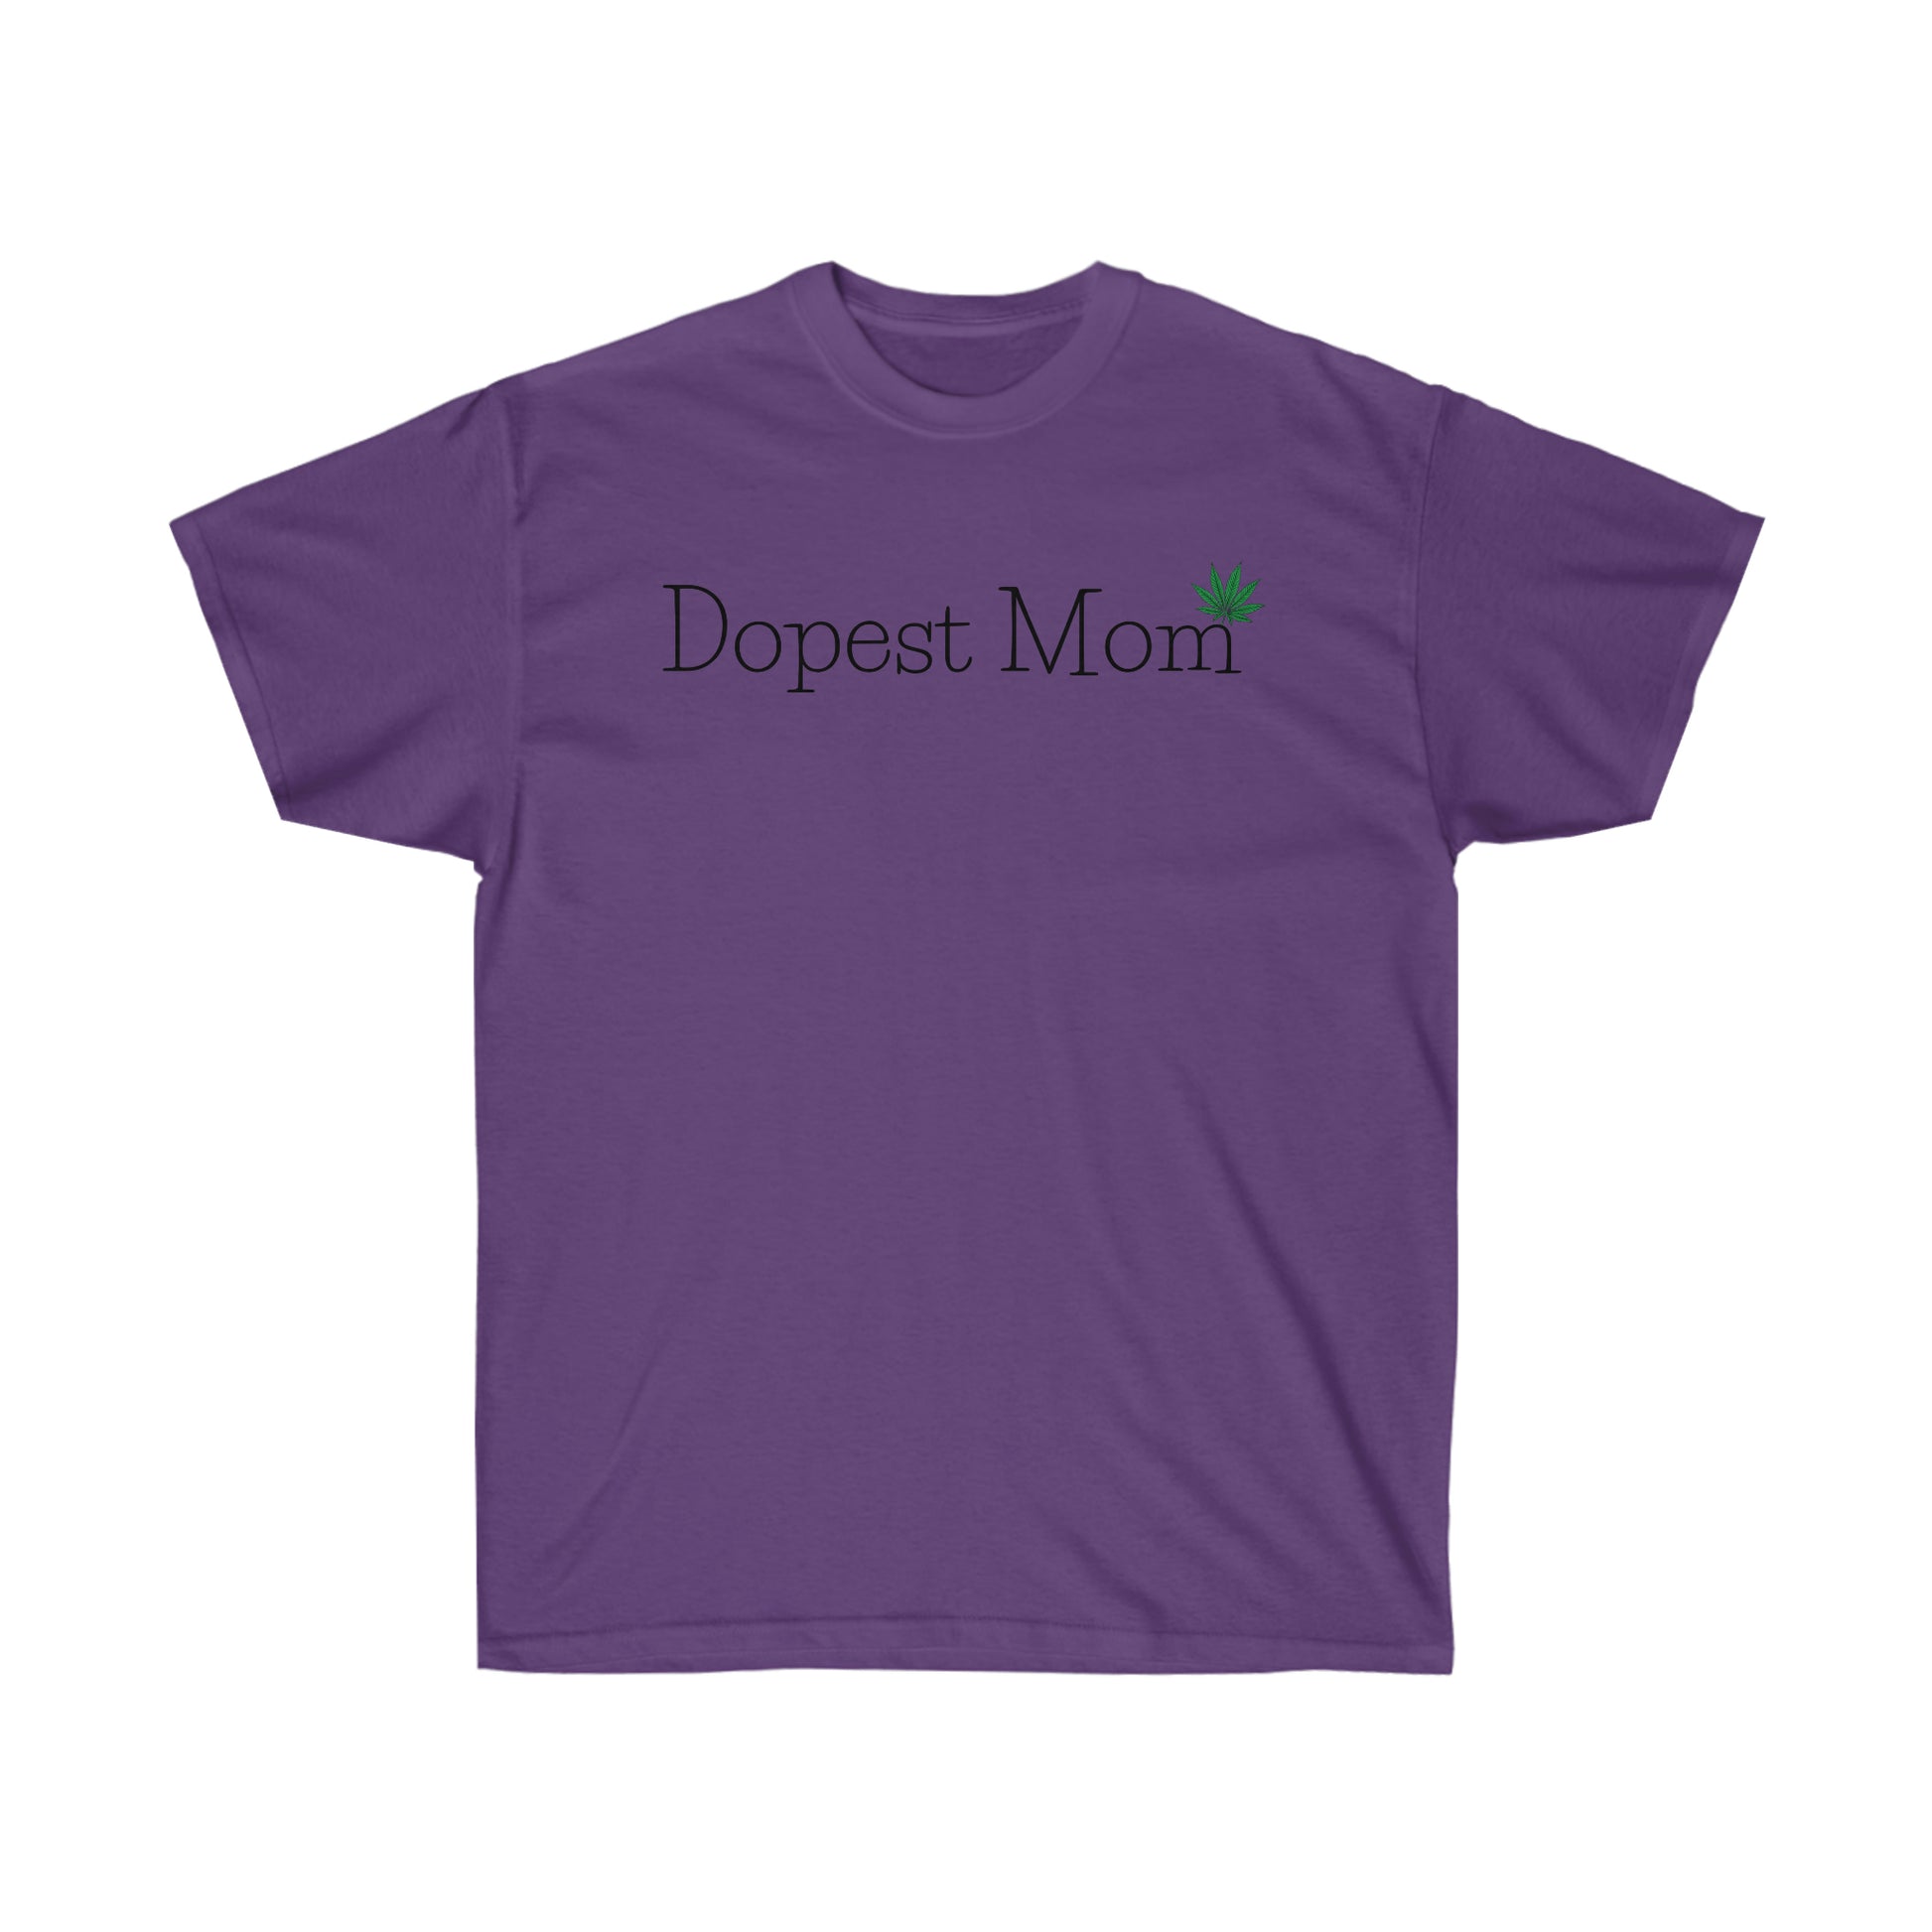 A Dopest Mom Weed T-Shirt with the word dopest mom on it.